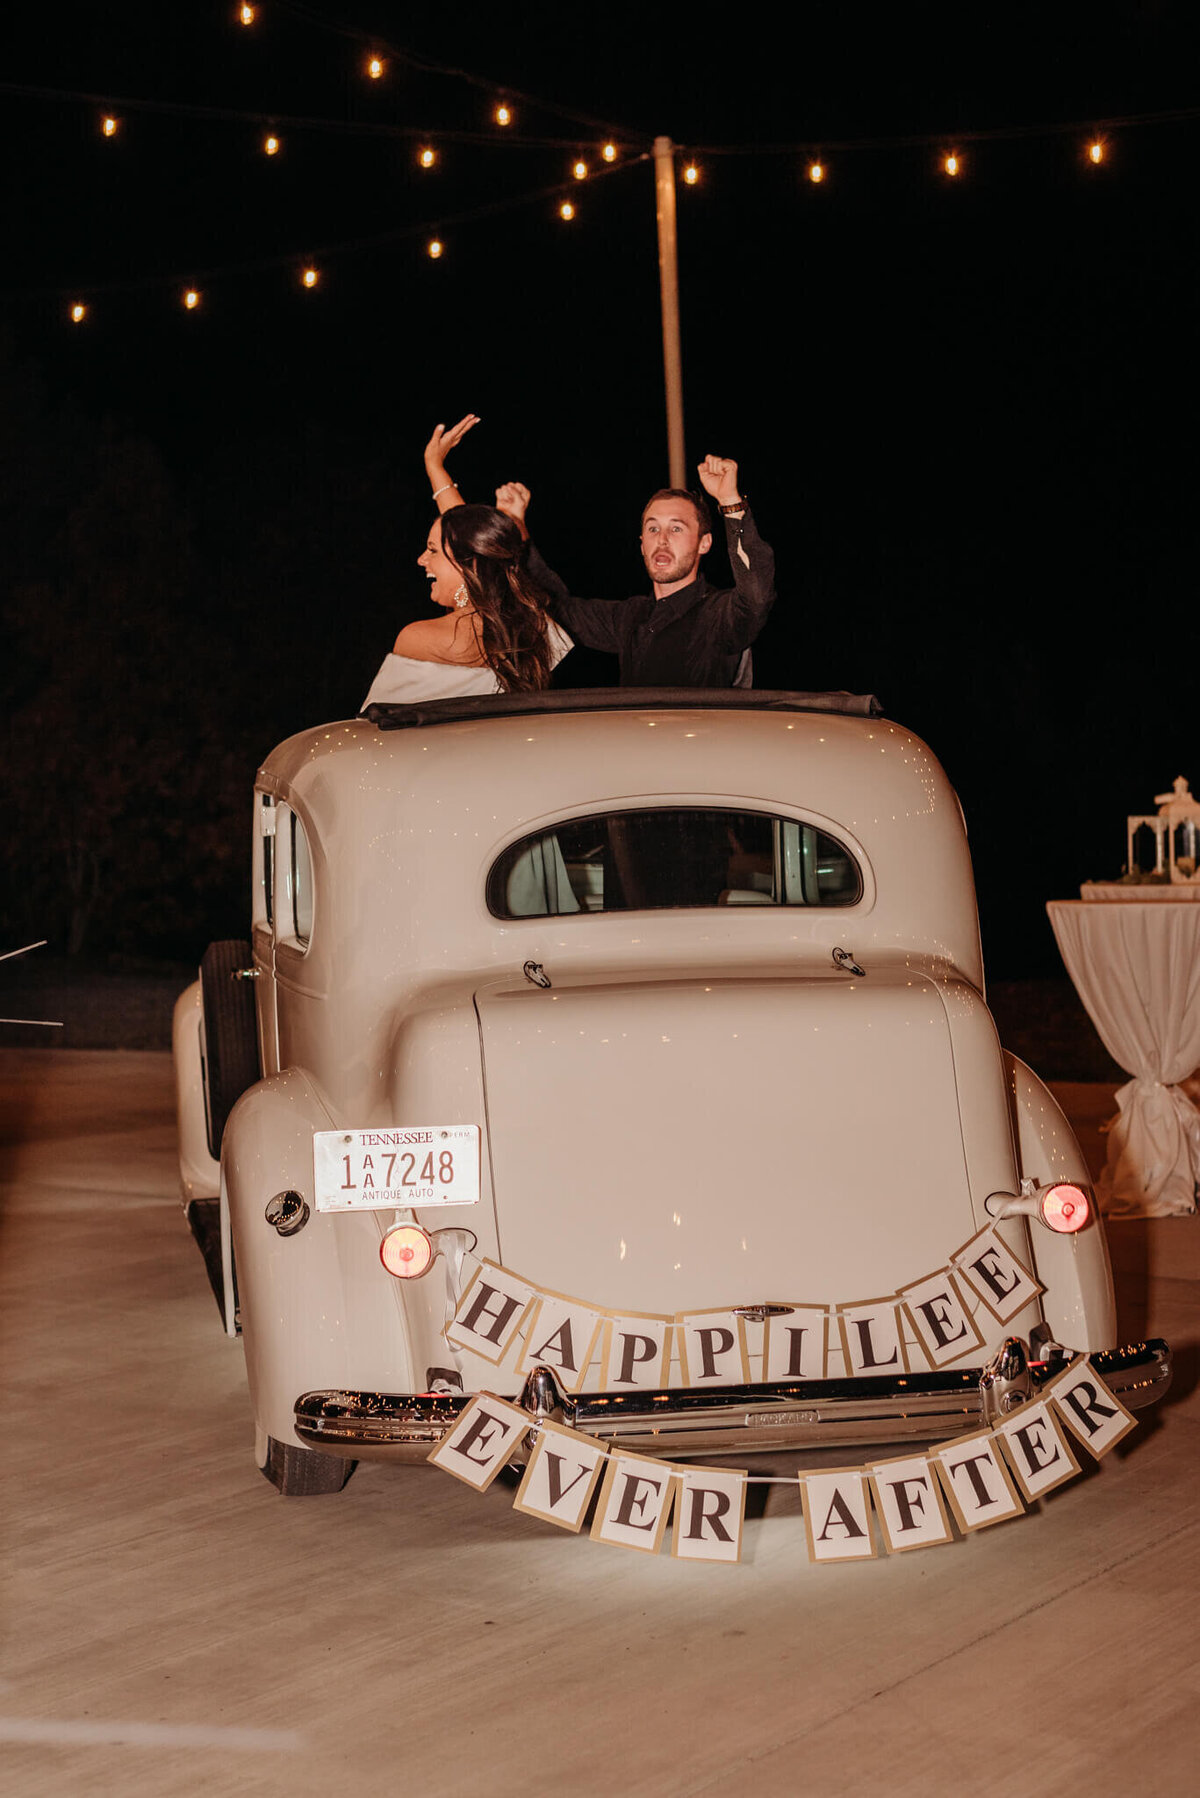 Photo of a bride and groom waving goodbye out of the rooftop of a white vintage vehicle with this sign happily ever after hanging off the back